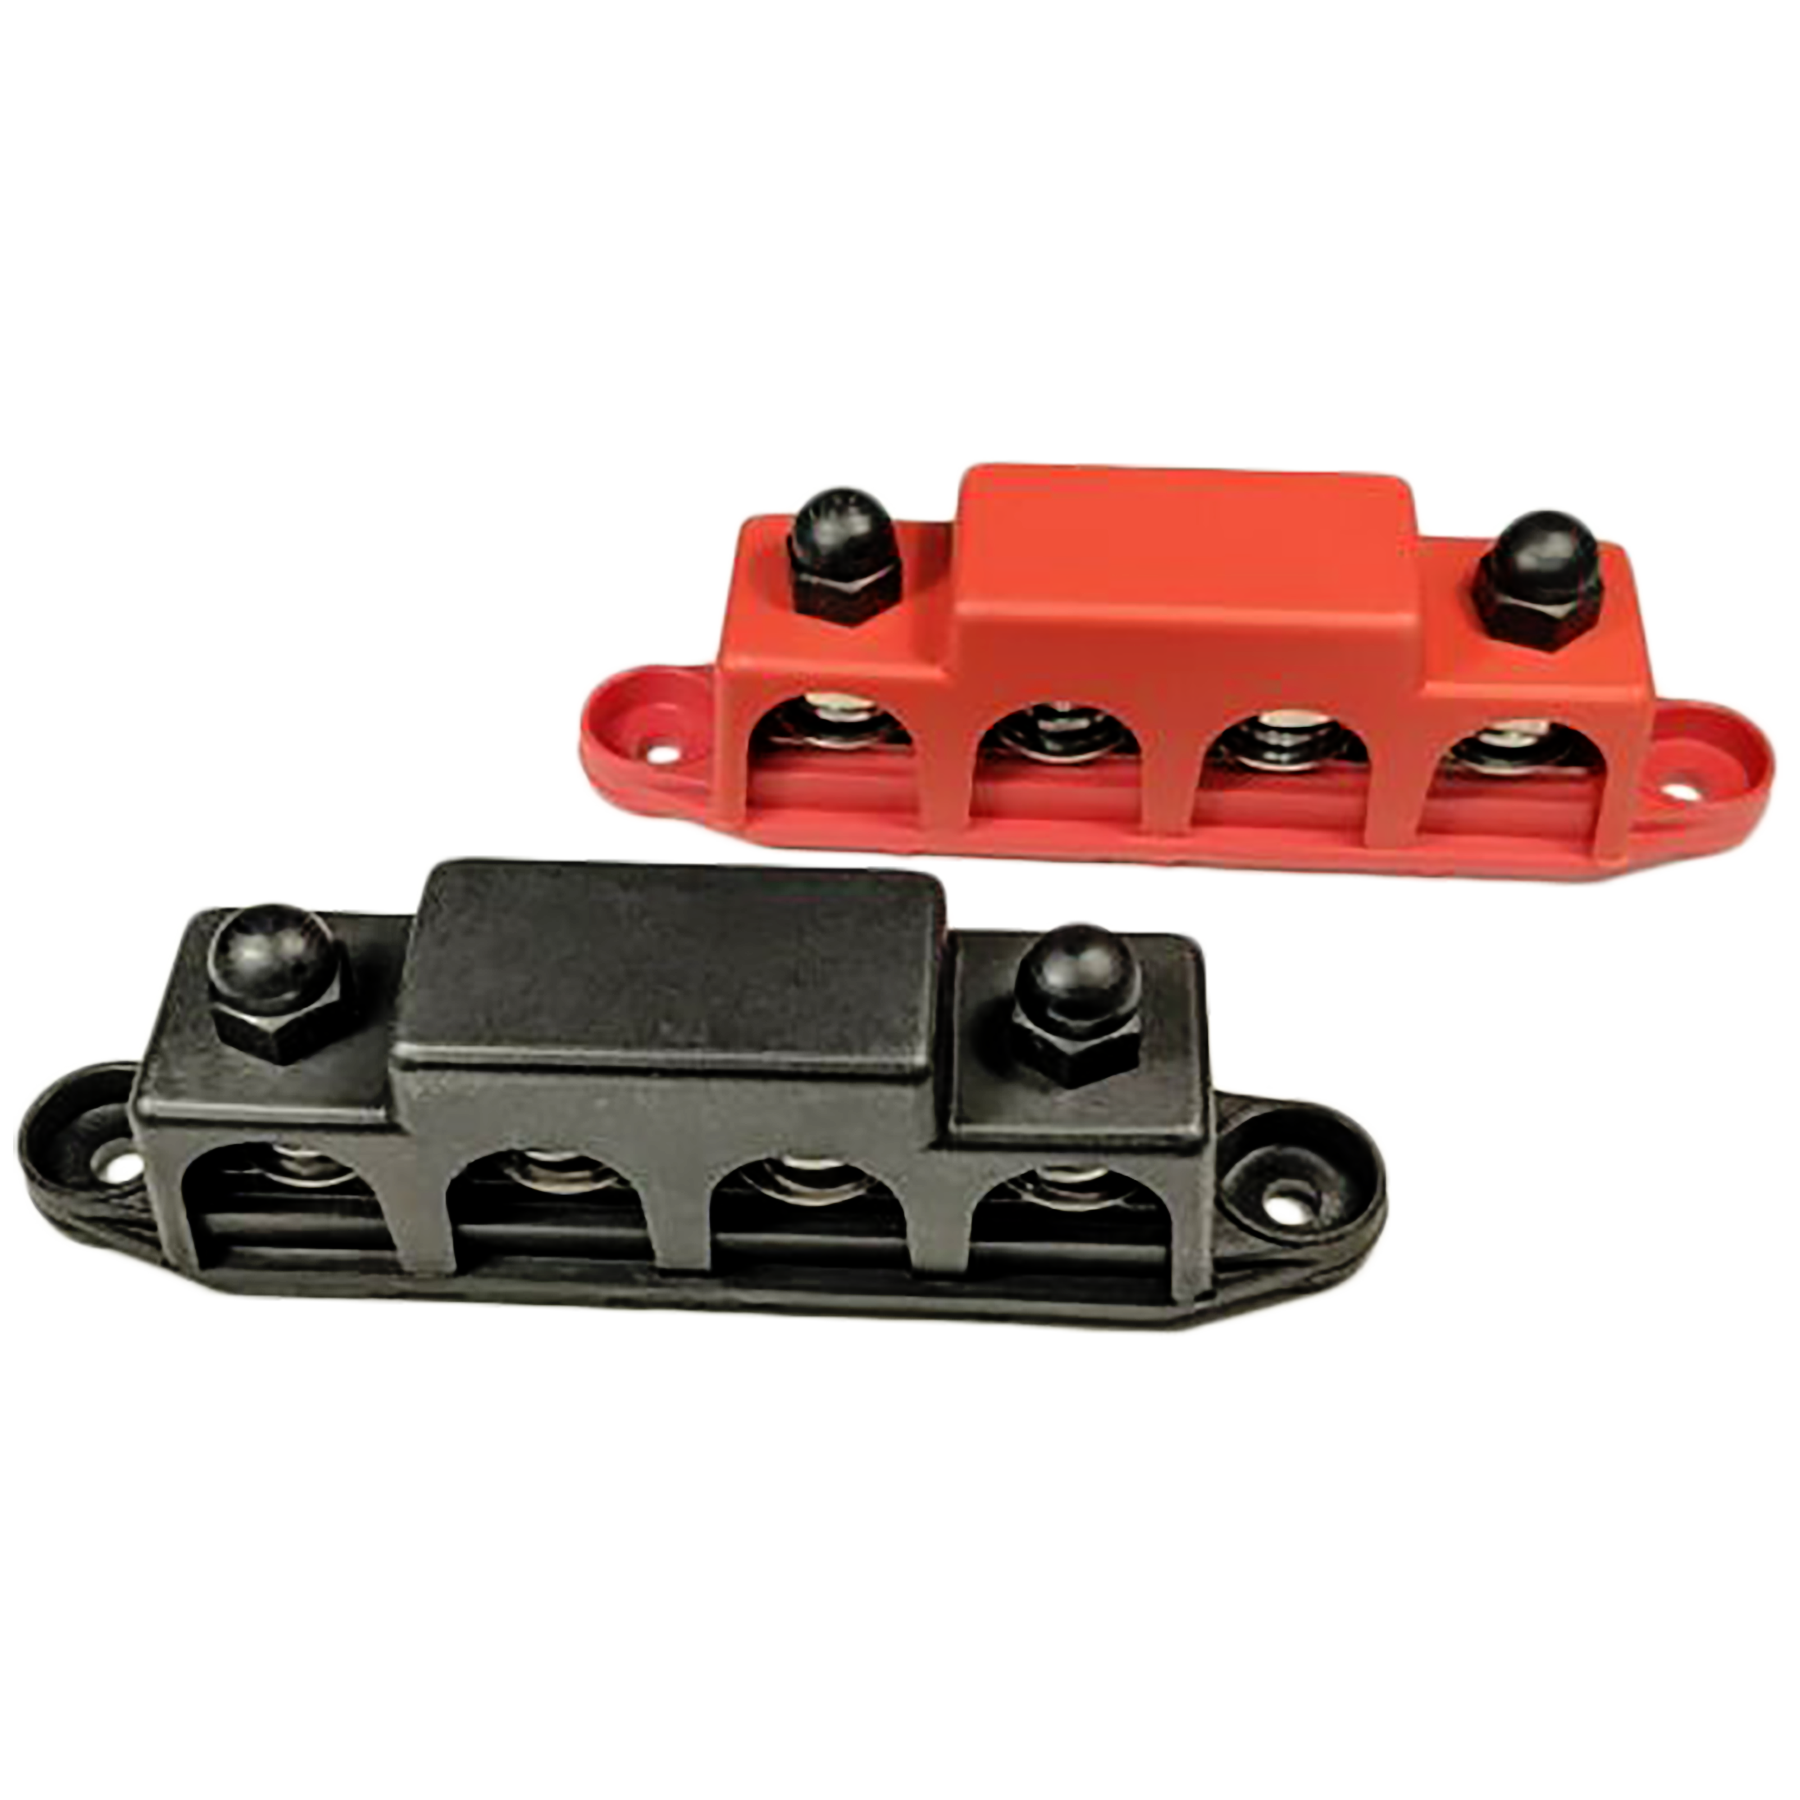 4 Post Busbar Bus Bar Power Distribution 12V 250A 3/8 in. Red and Blac –  Ameriamp